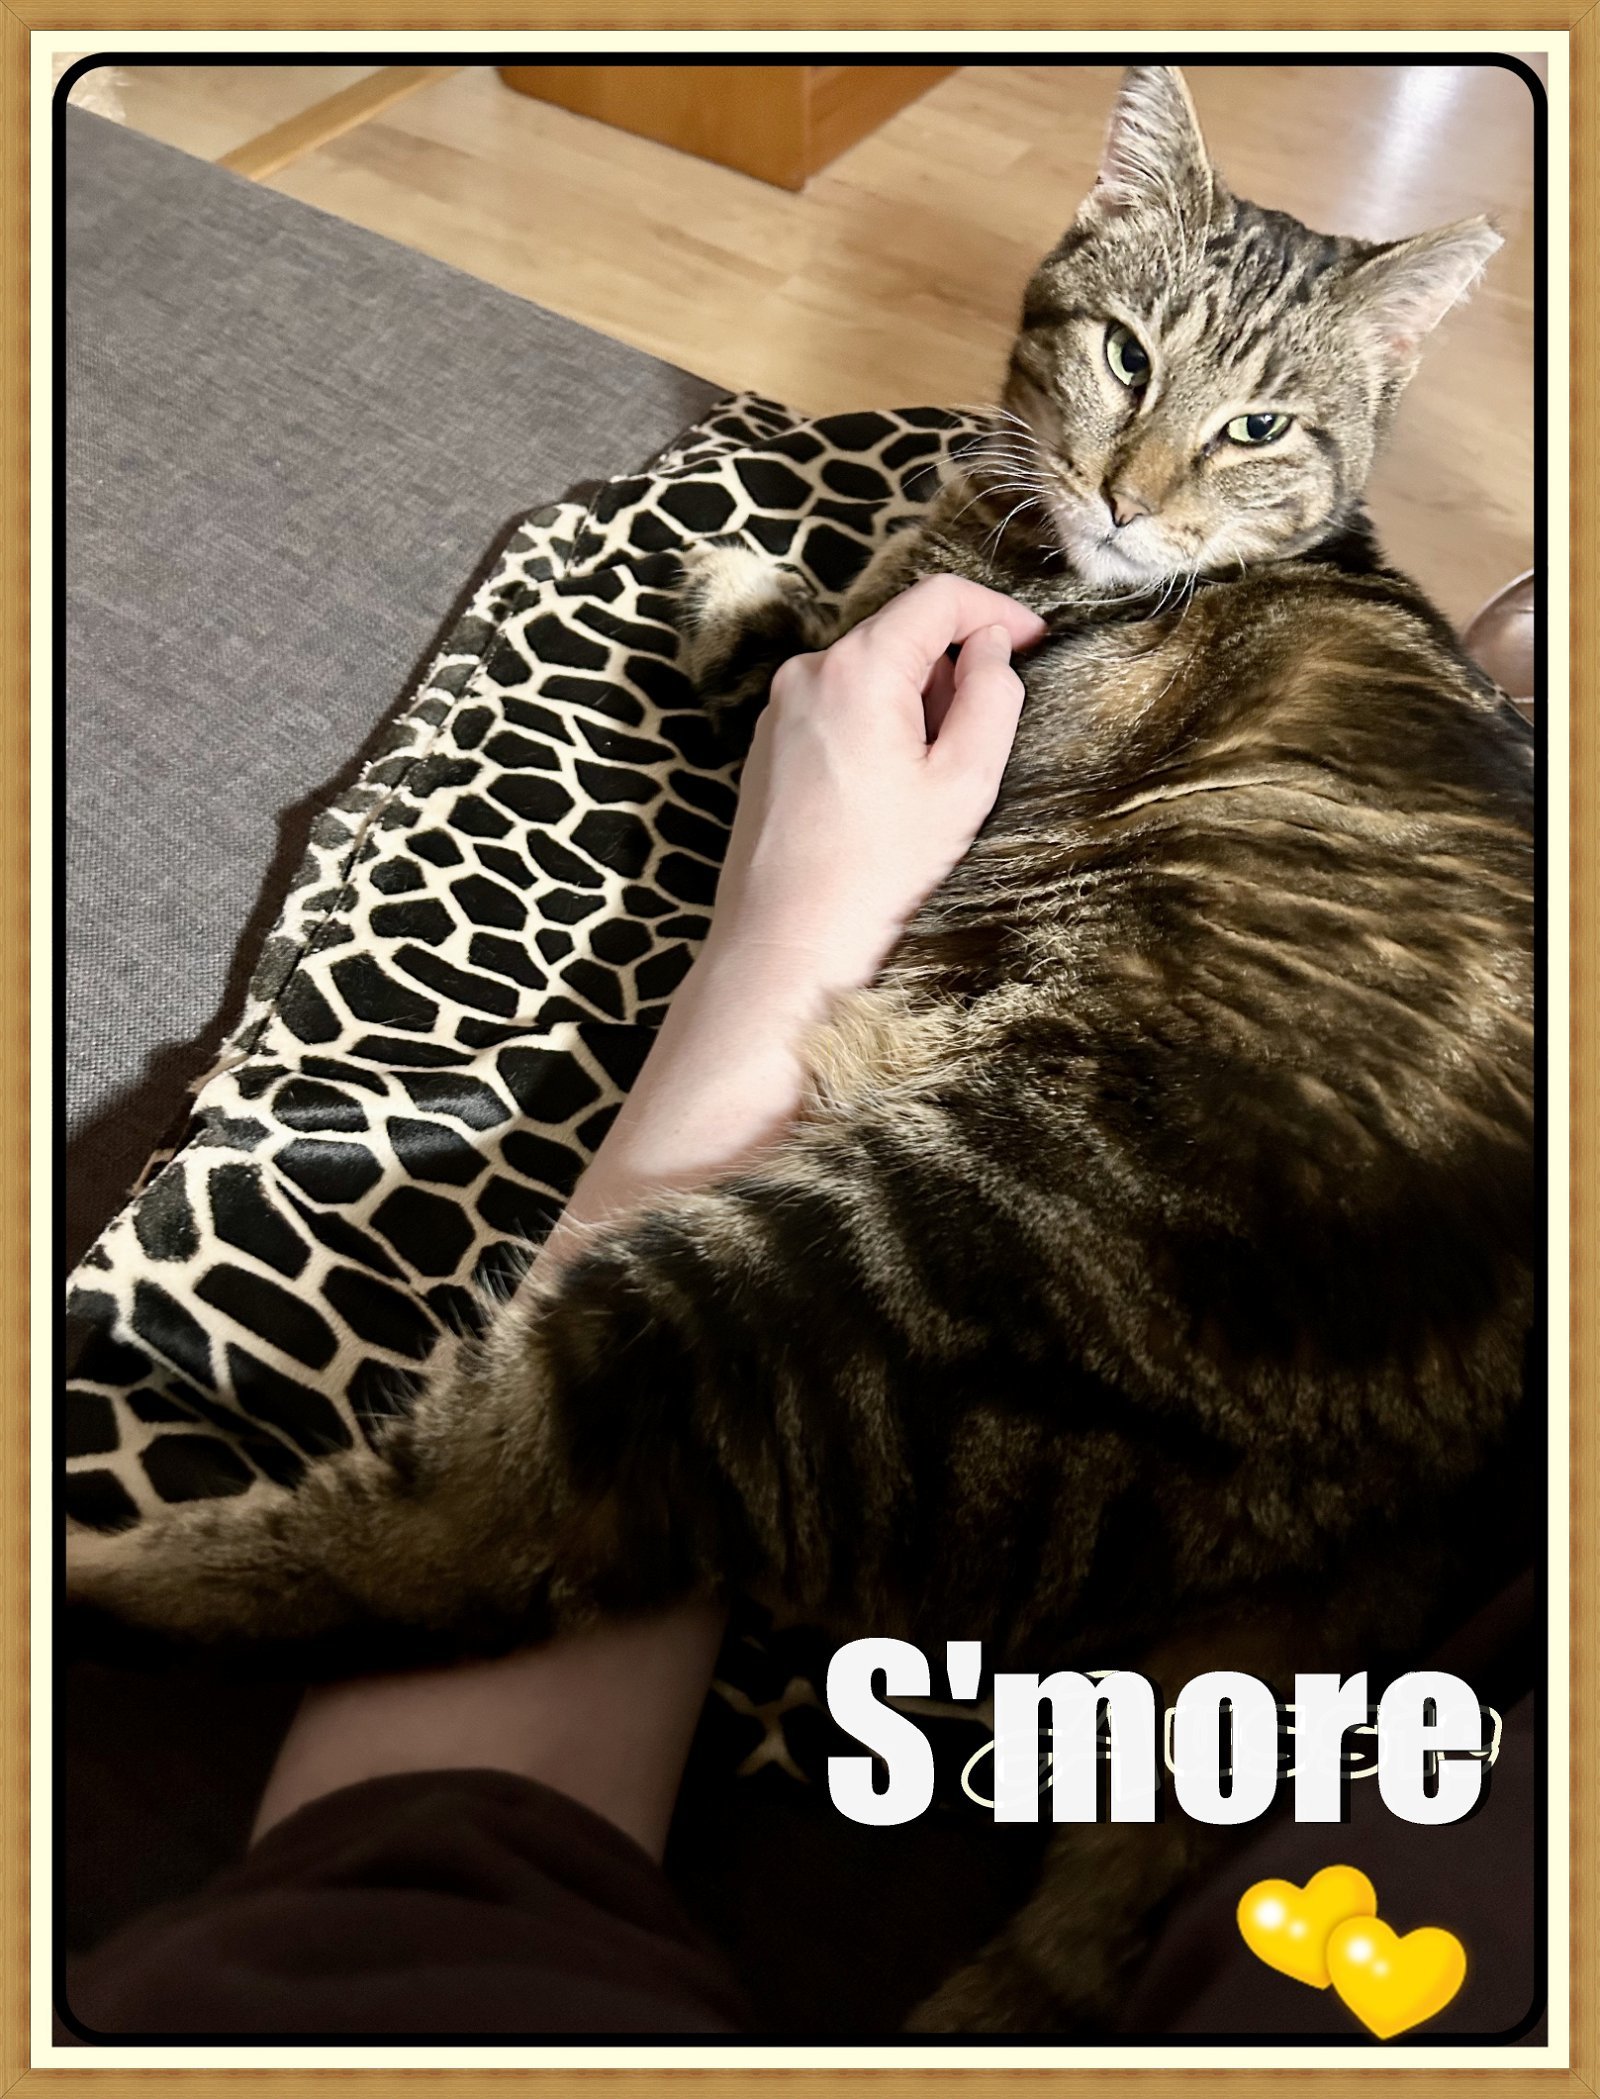 S'MORE